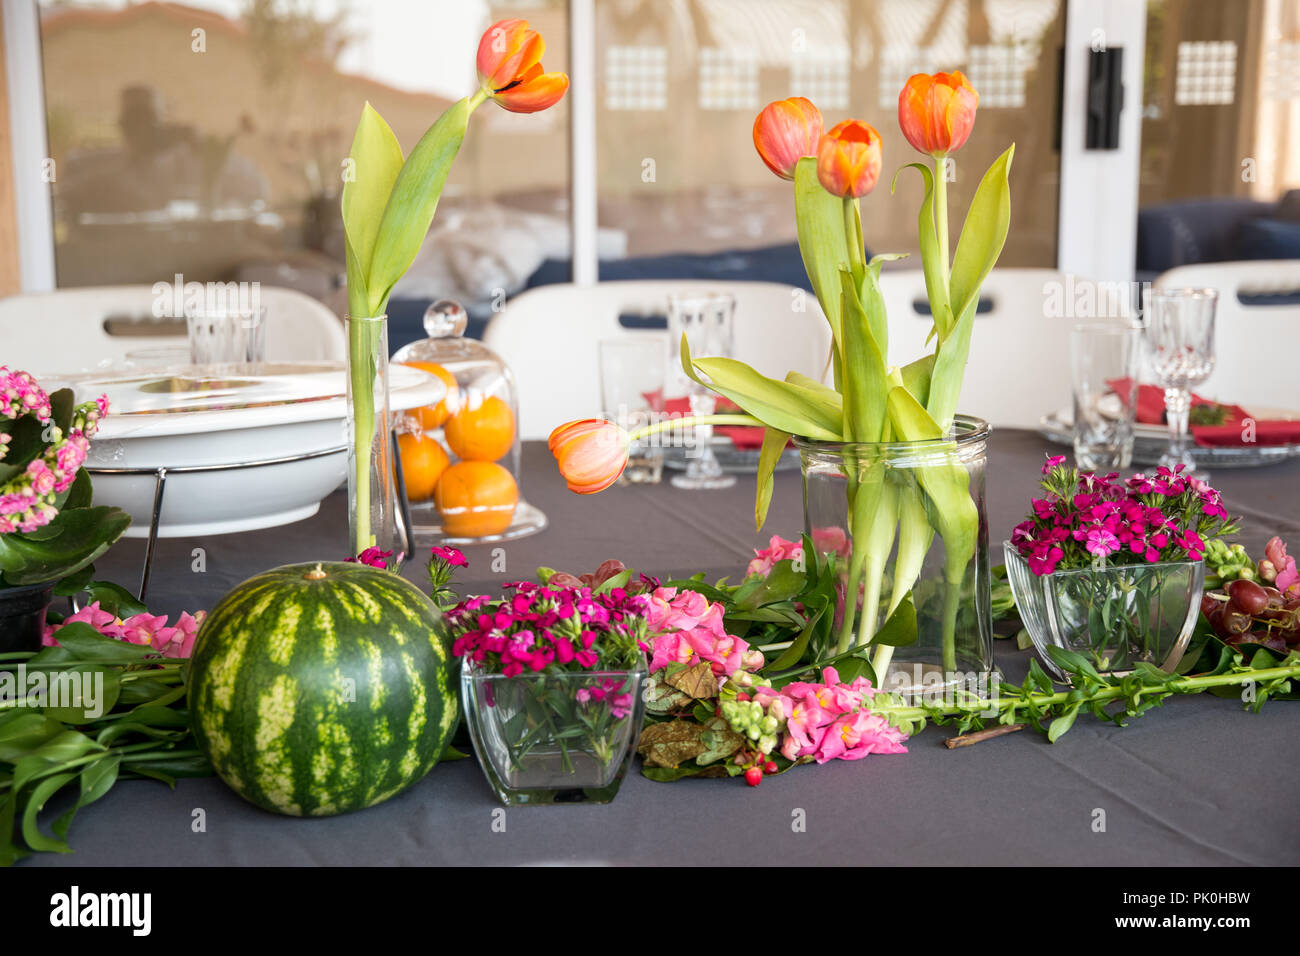 A lunch table with floral display of lovely orange flowers with colourful pink and reddish arrangements in foreground with a round watermelon & grapes Stock Photo